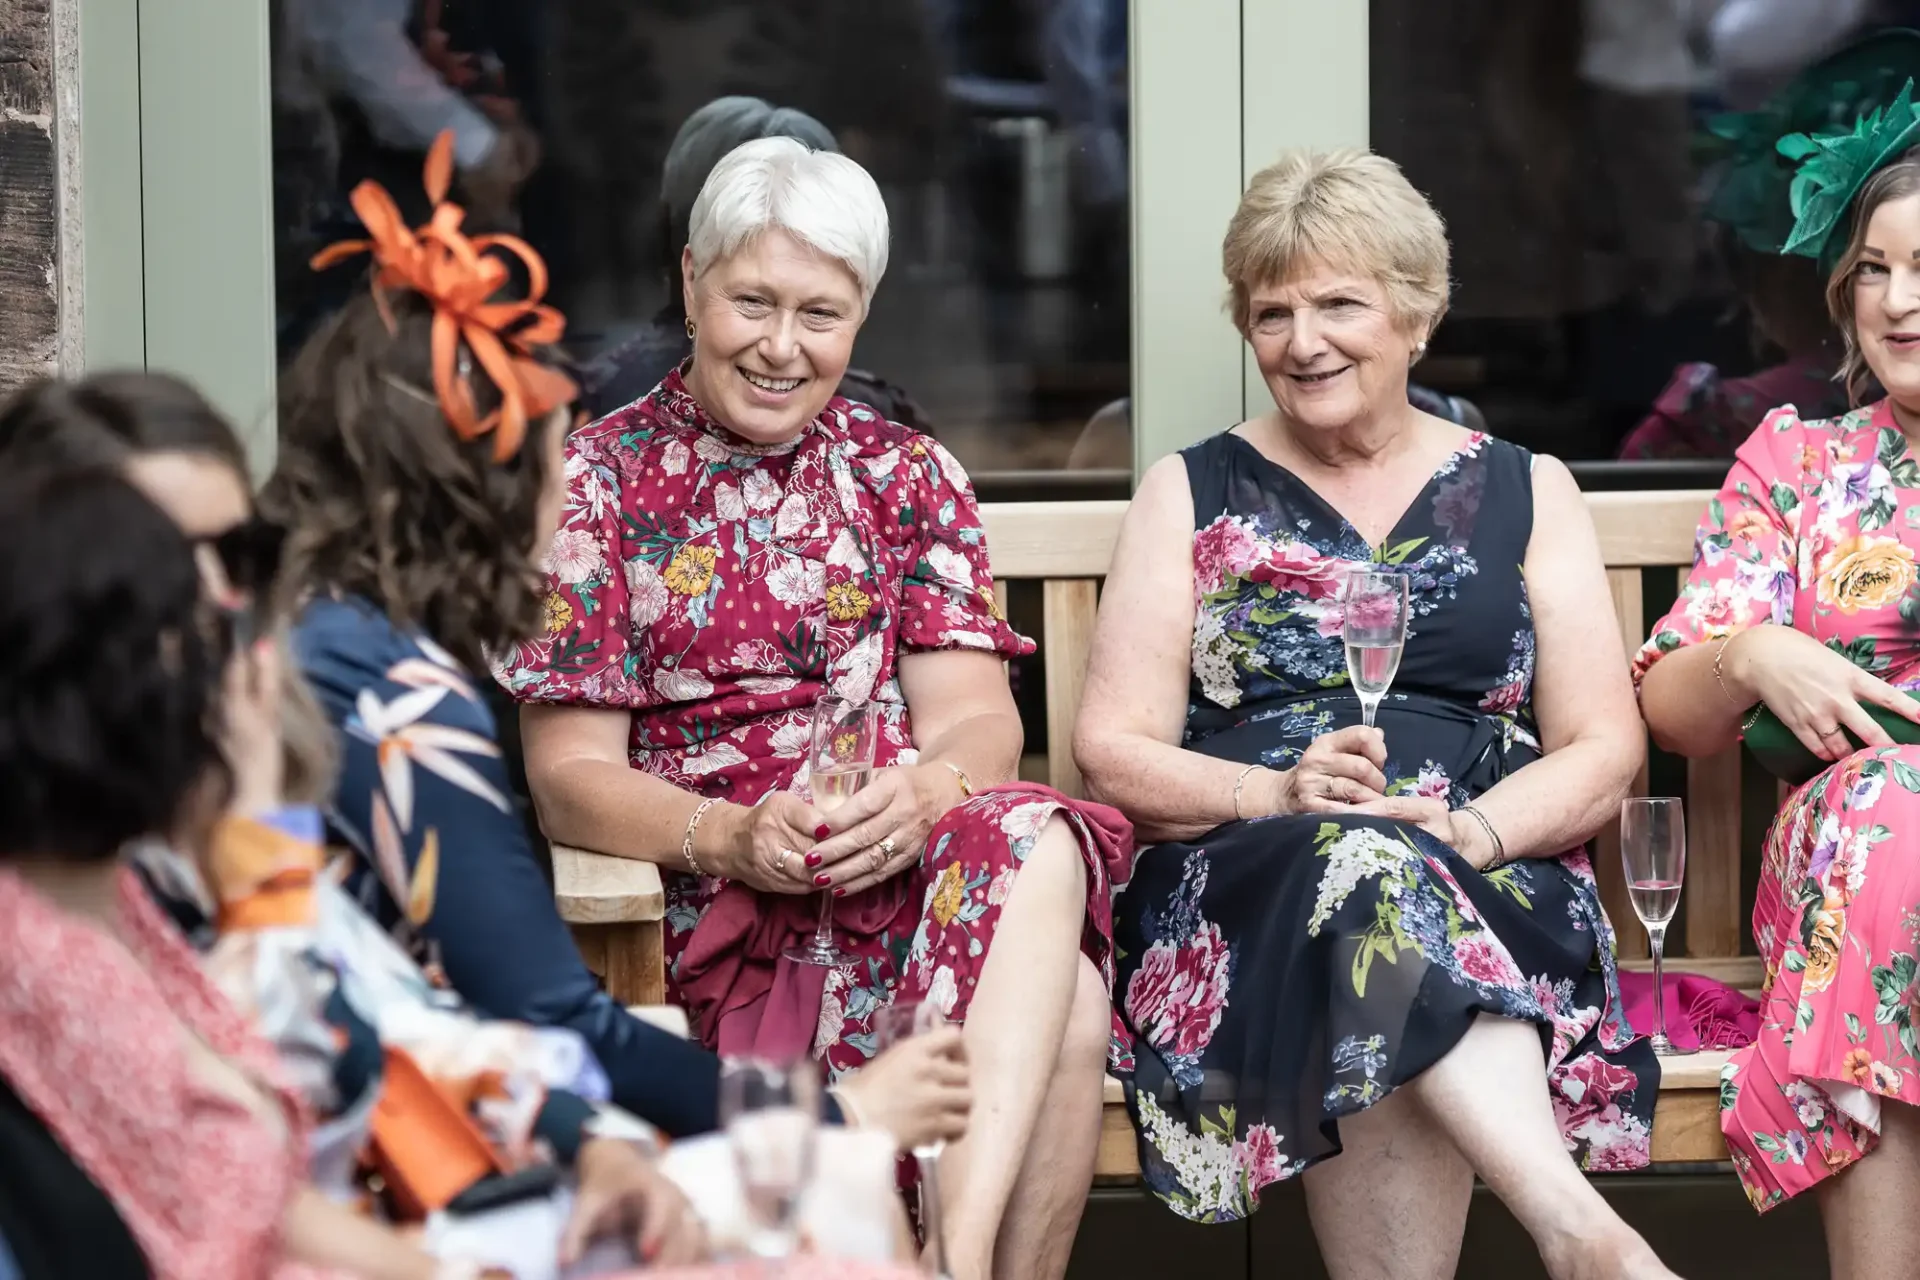 Four women in floral dresses with hats or fascinators sitting and smiling, one holding a champagne flute, at an outdoor social event.